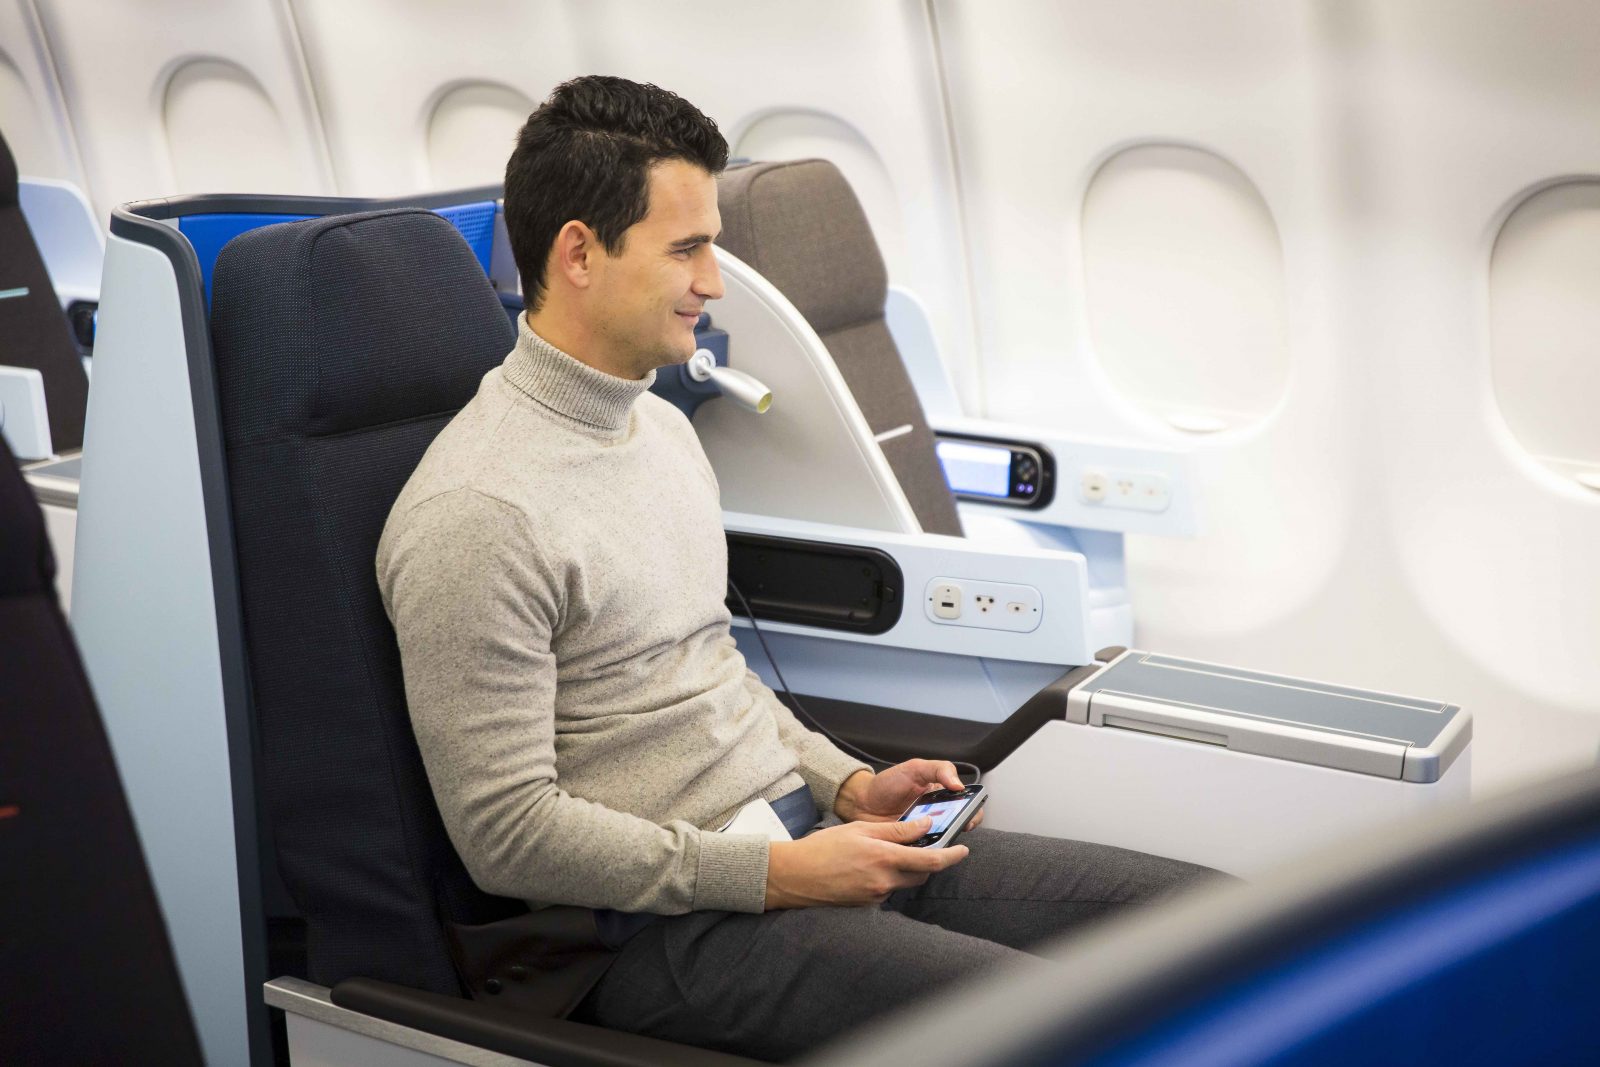 AT LAST: Dutch Carrier, KLM Will at Last Retrofit New Business Class on Airbus A330 Aircraft